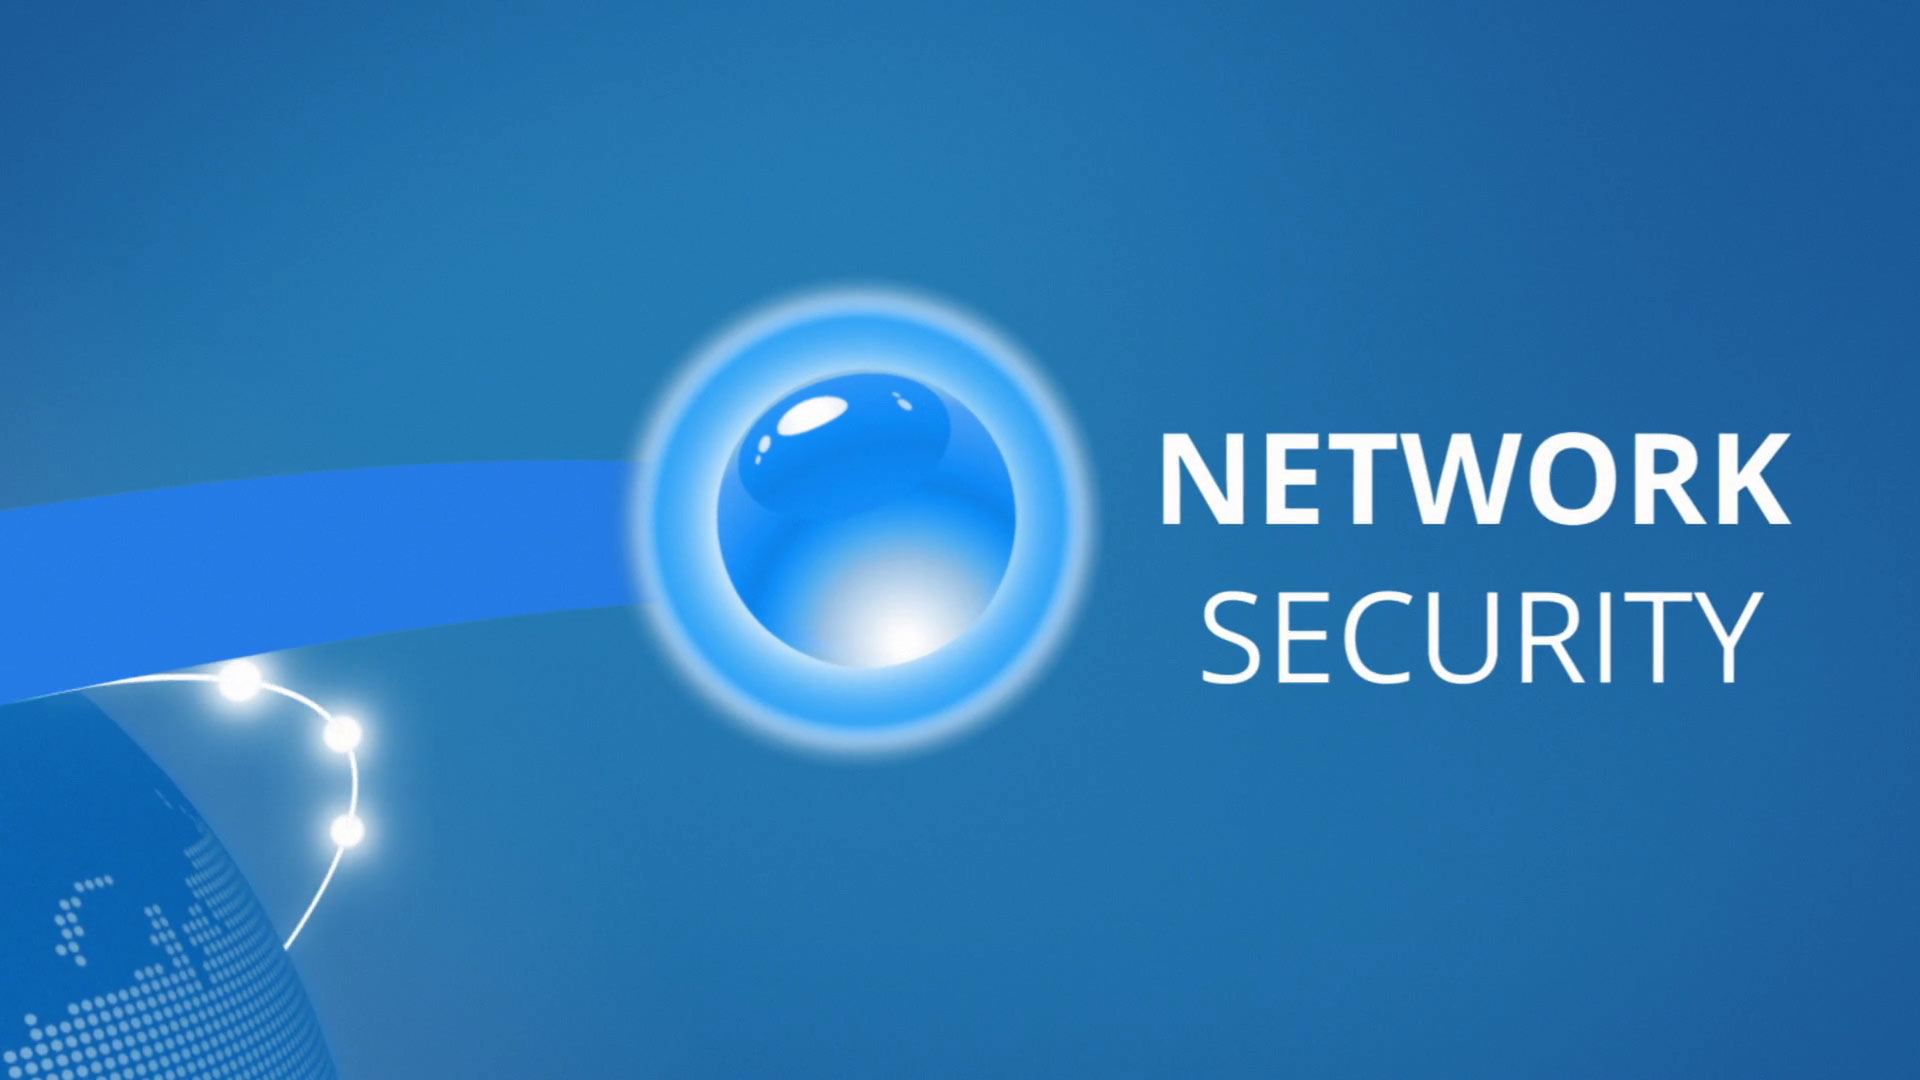 Network Security - Network Security Images Hd , HD Wallpaper & Backgrounds